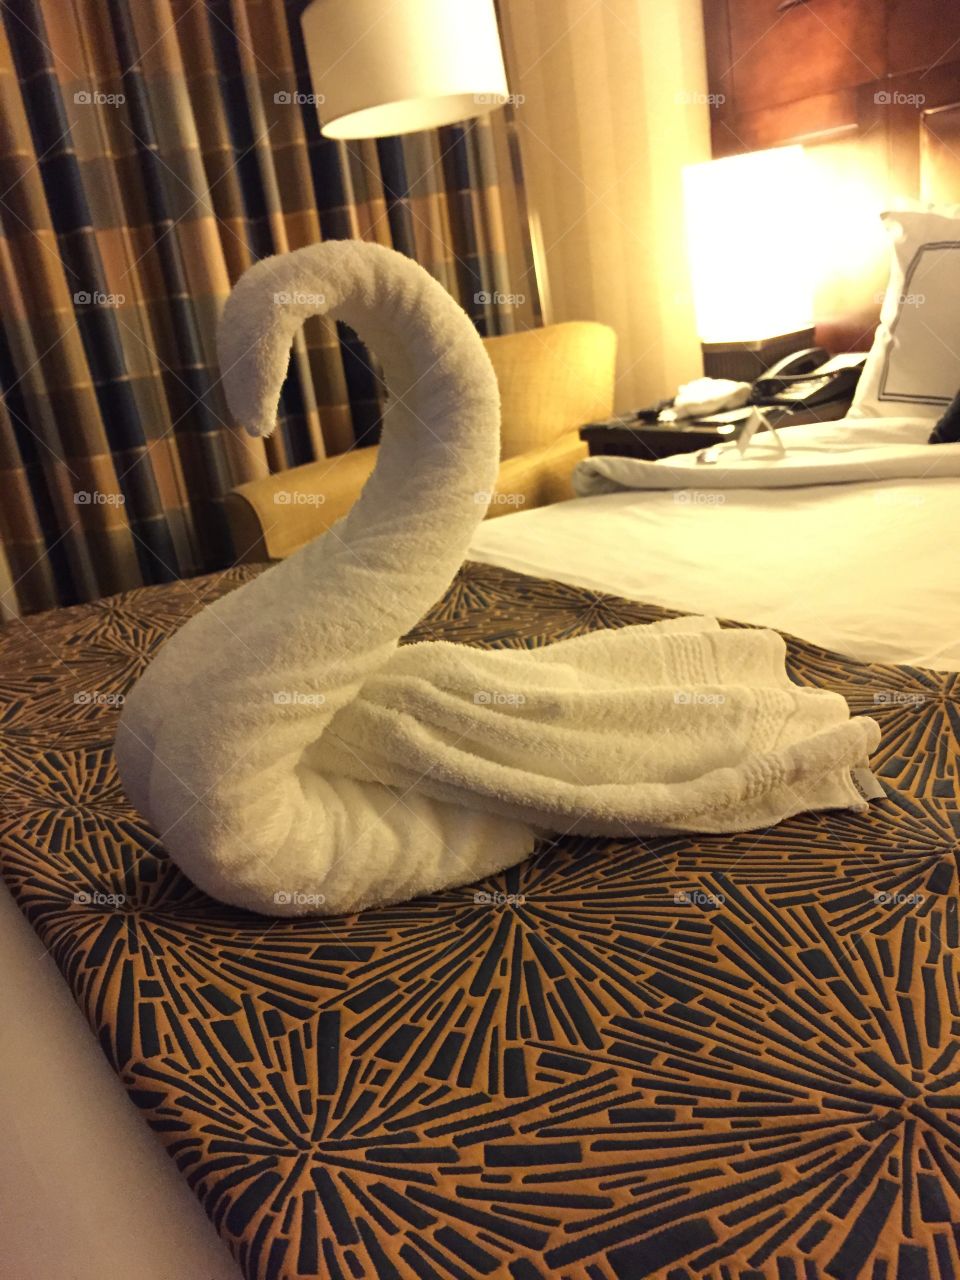 Hotel towel folded into a swan on a bed.